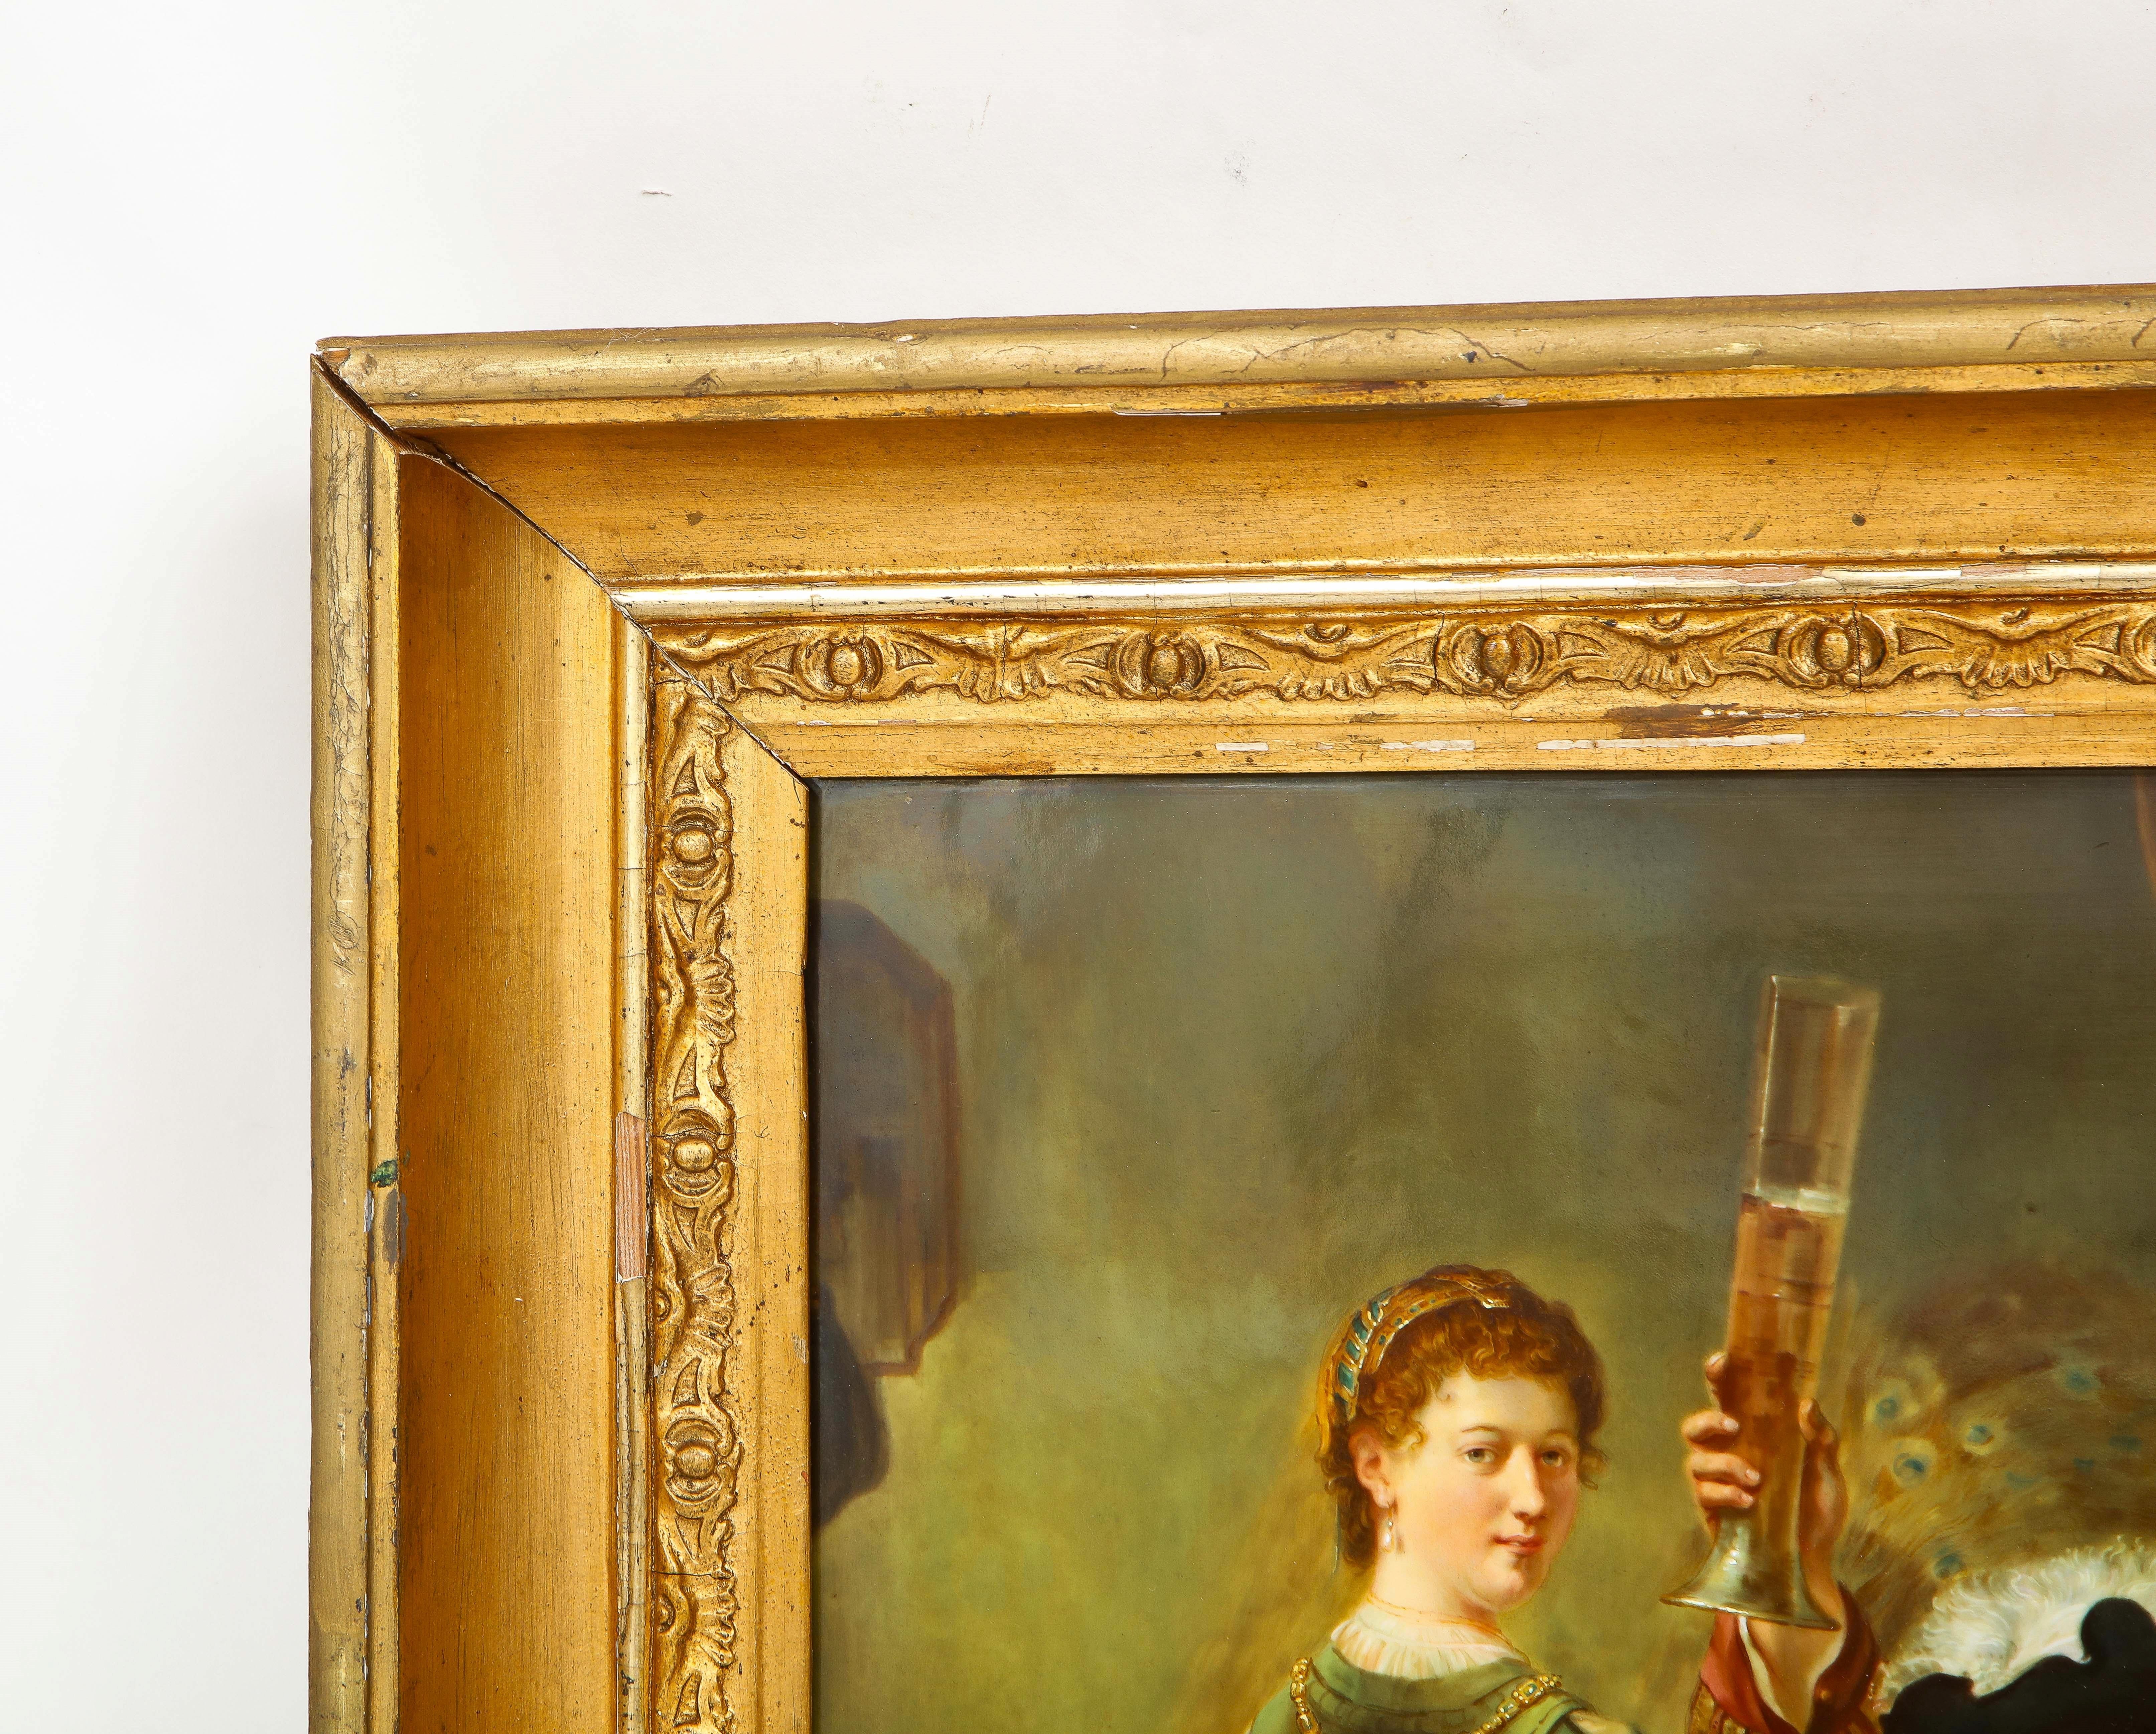 German 19th C. Meissen Porcelain Plaque Depicting Rembrandt and Saskia in the Tavern For Sale